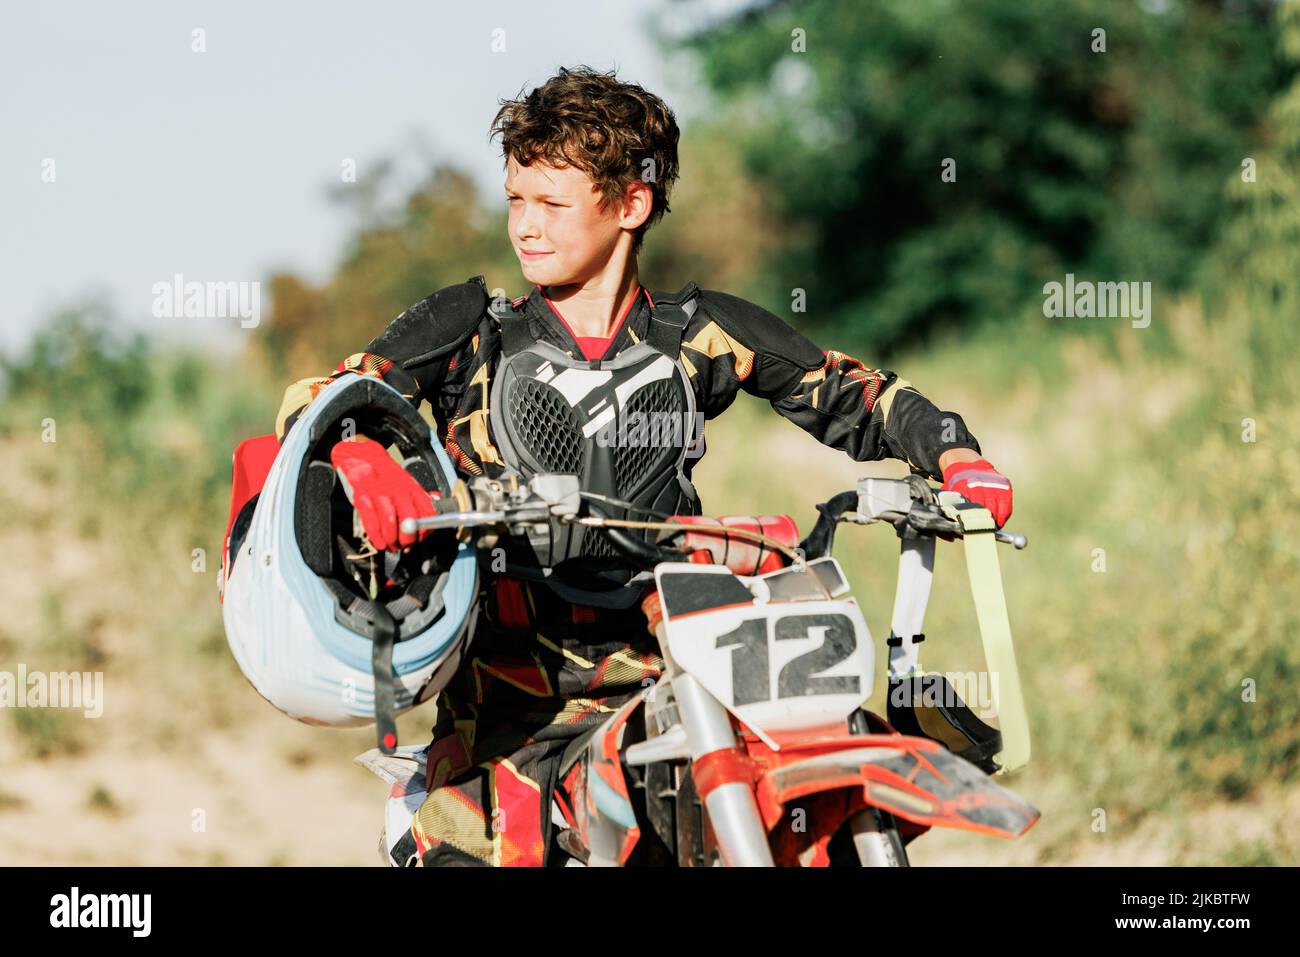 Live shot of junior sportsman, motorcyclist training on motorbike at hot summer day, outdoors